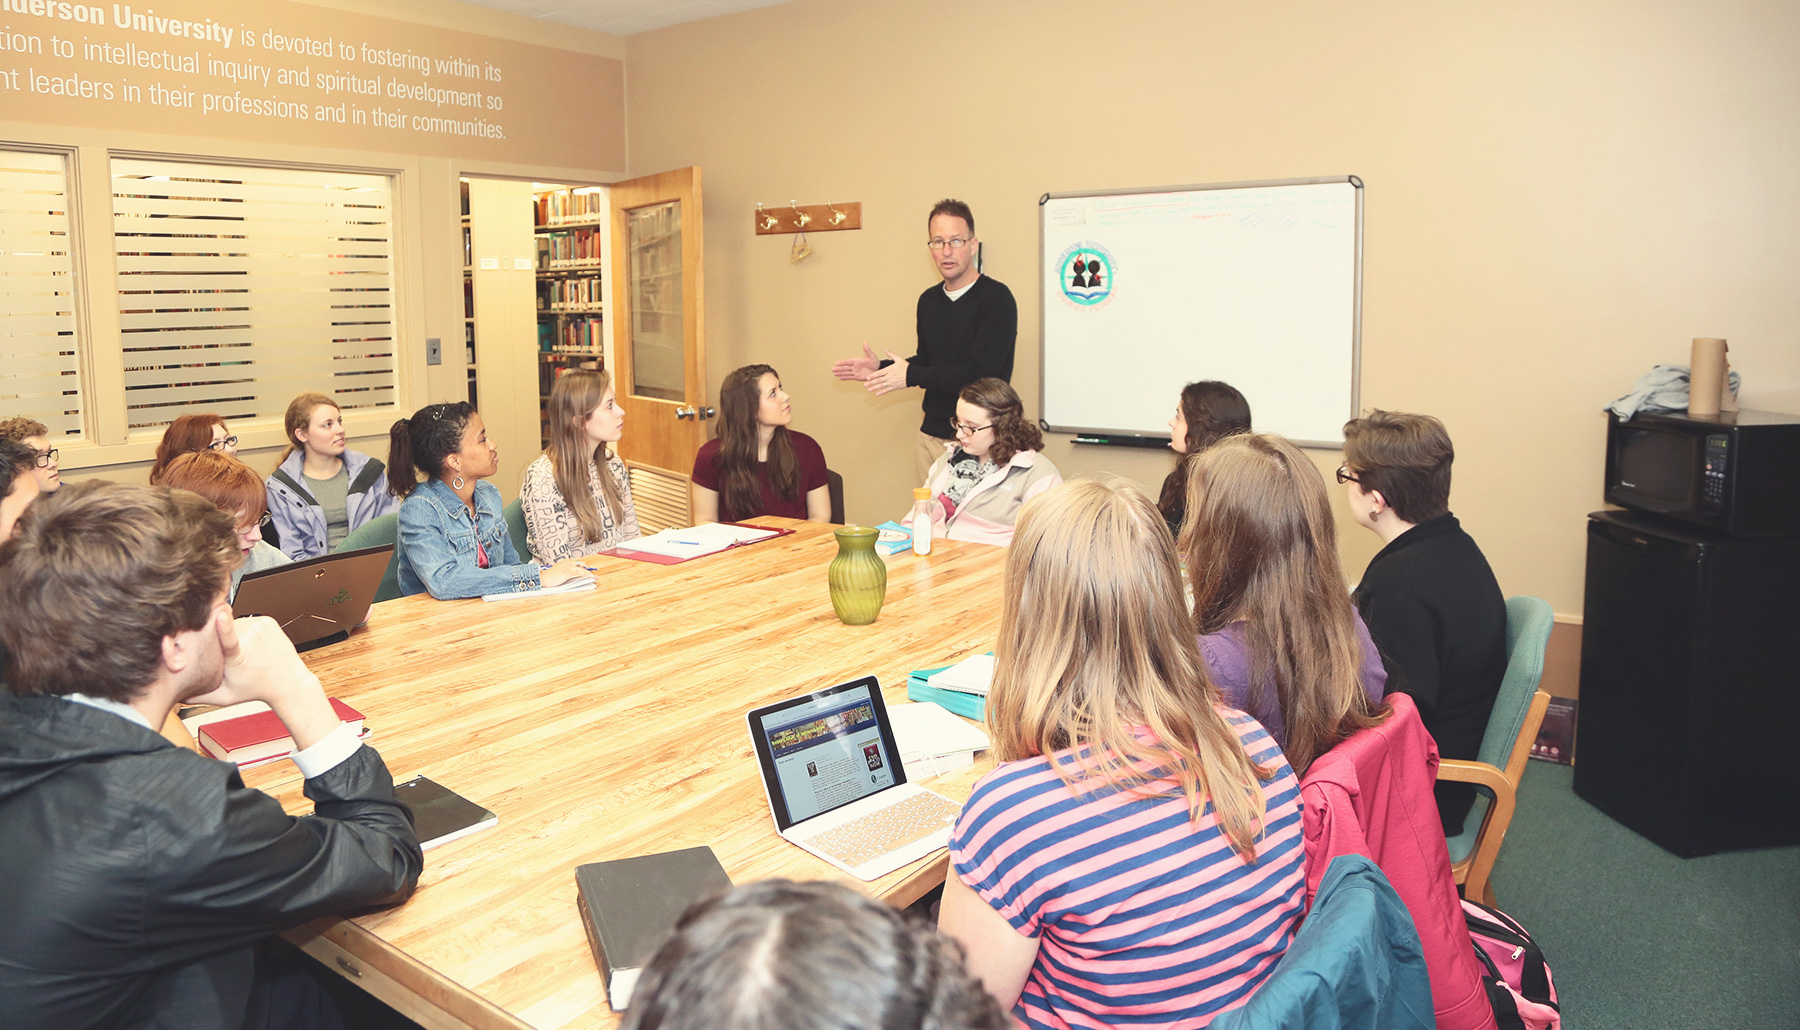 a male professor talks to a class seated around a large wooden table